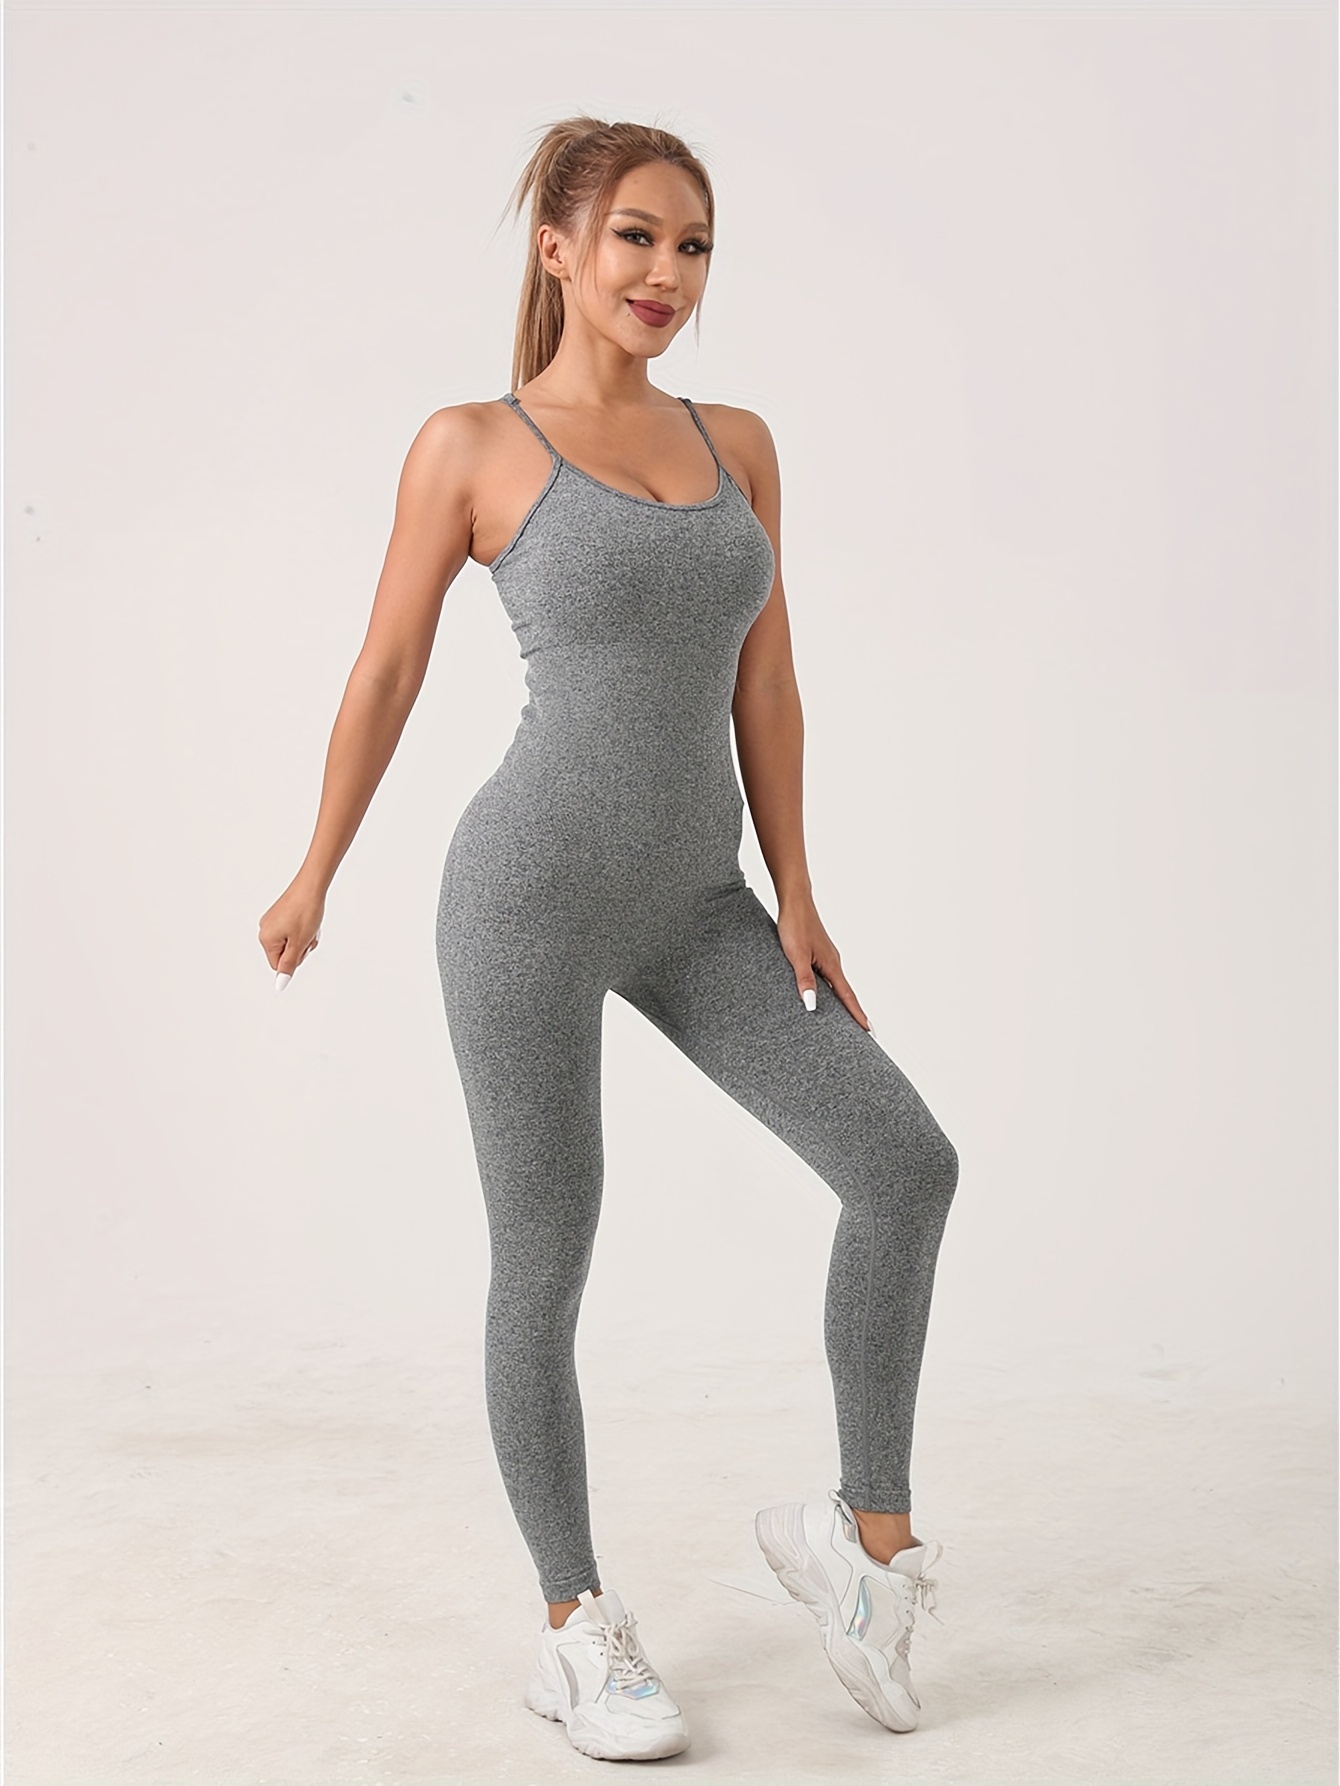 Blue One Piece Fitness Overalls, Jumpsuit for Gym Training, Pilates or  Yoga, Body Slimming and Booty Lifting Workout Apparel for Women -  New  Zealand